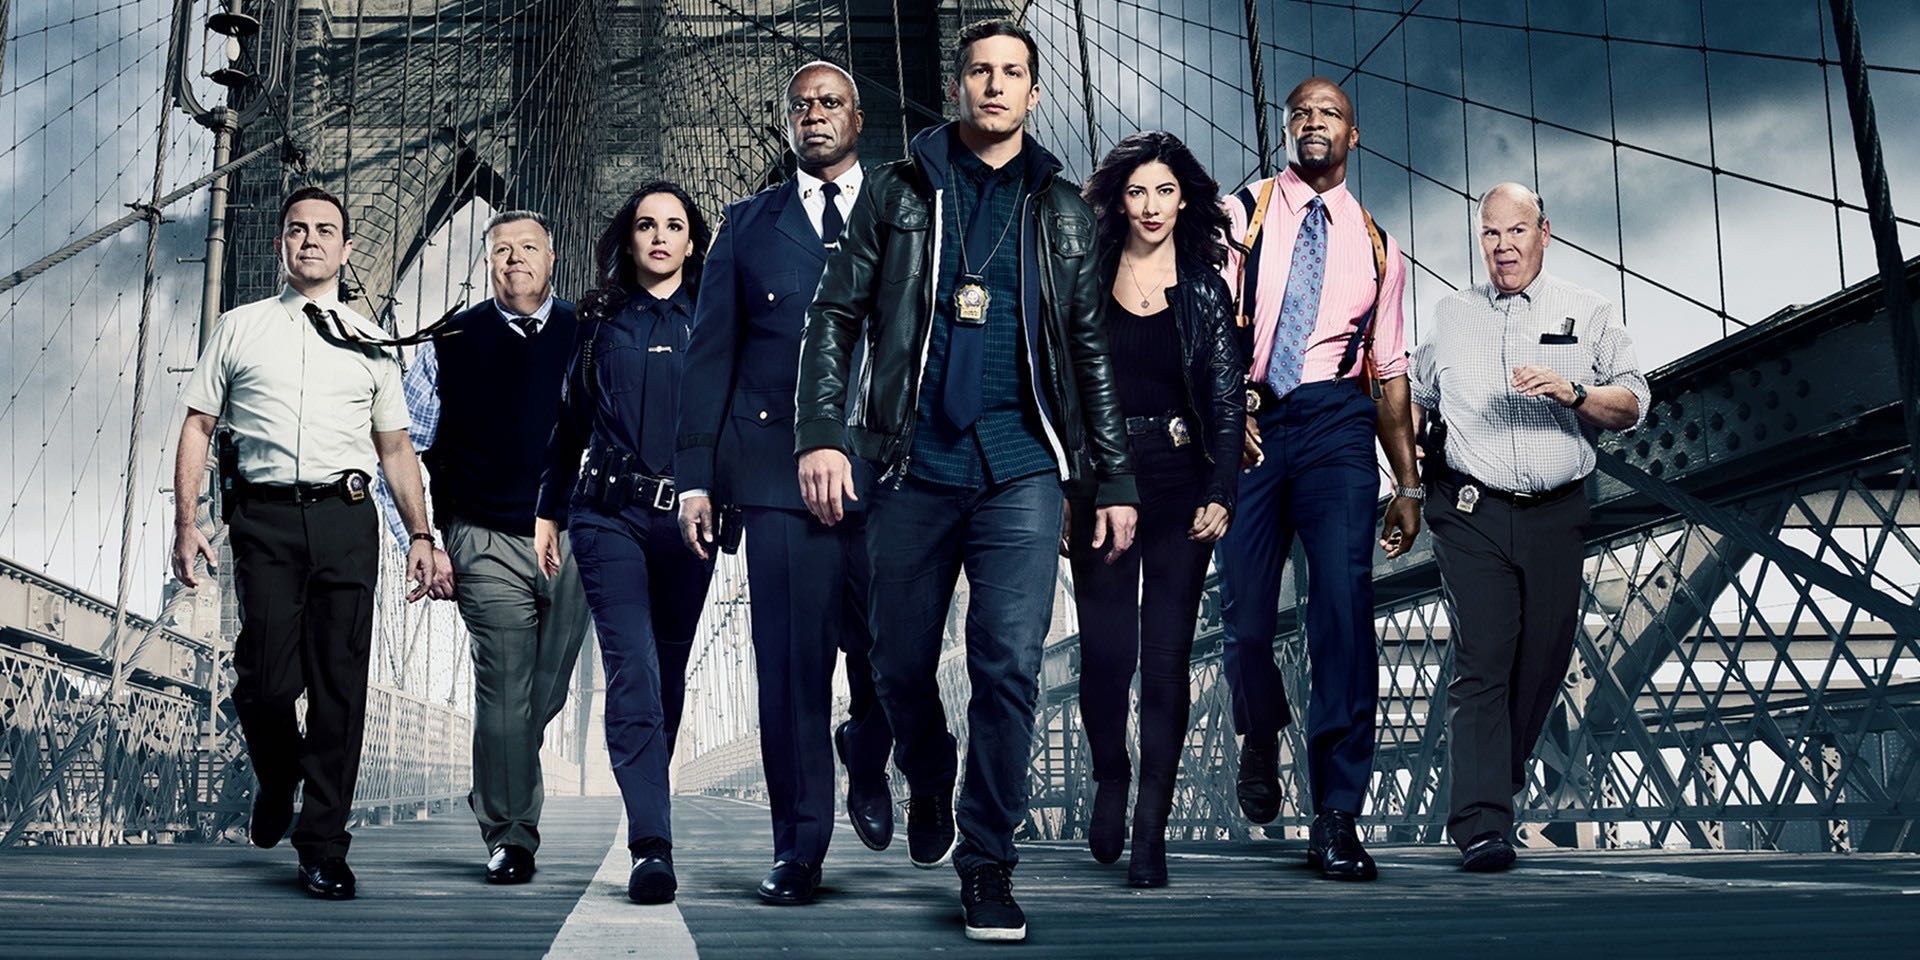 The cast of Brooklyn Nine-Nine in a promo photo